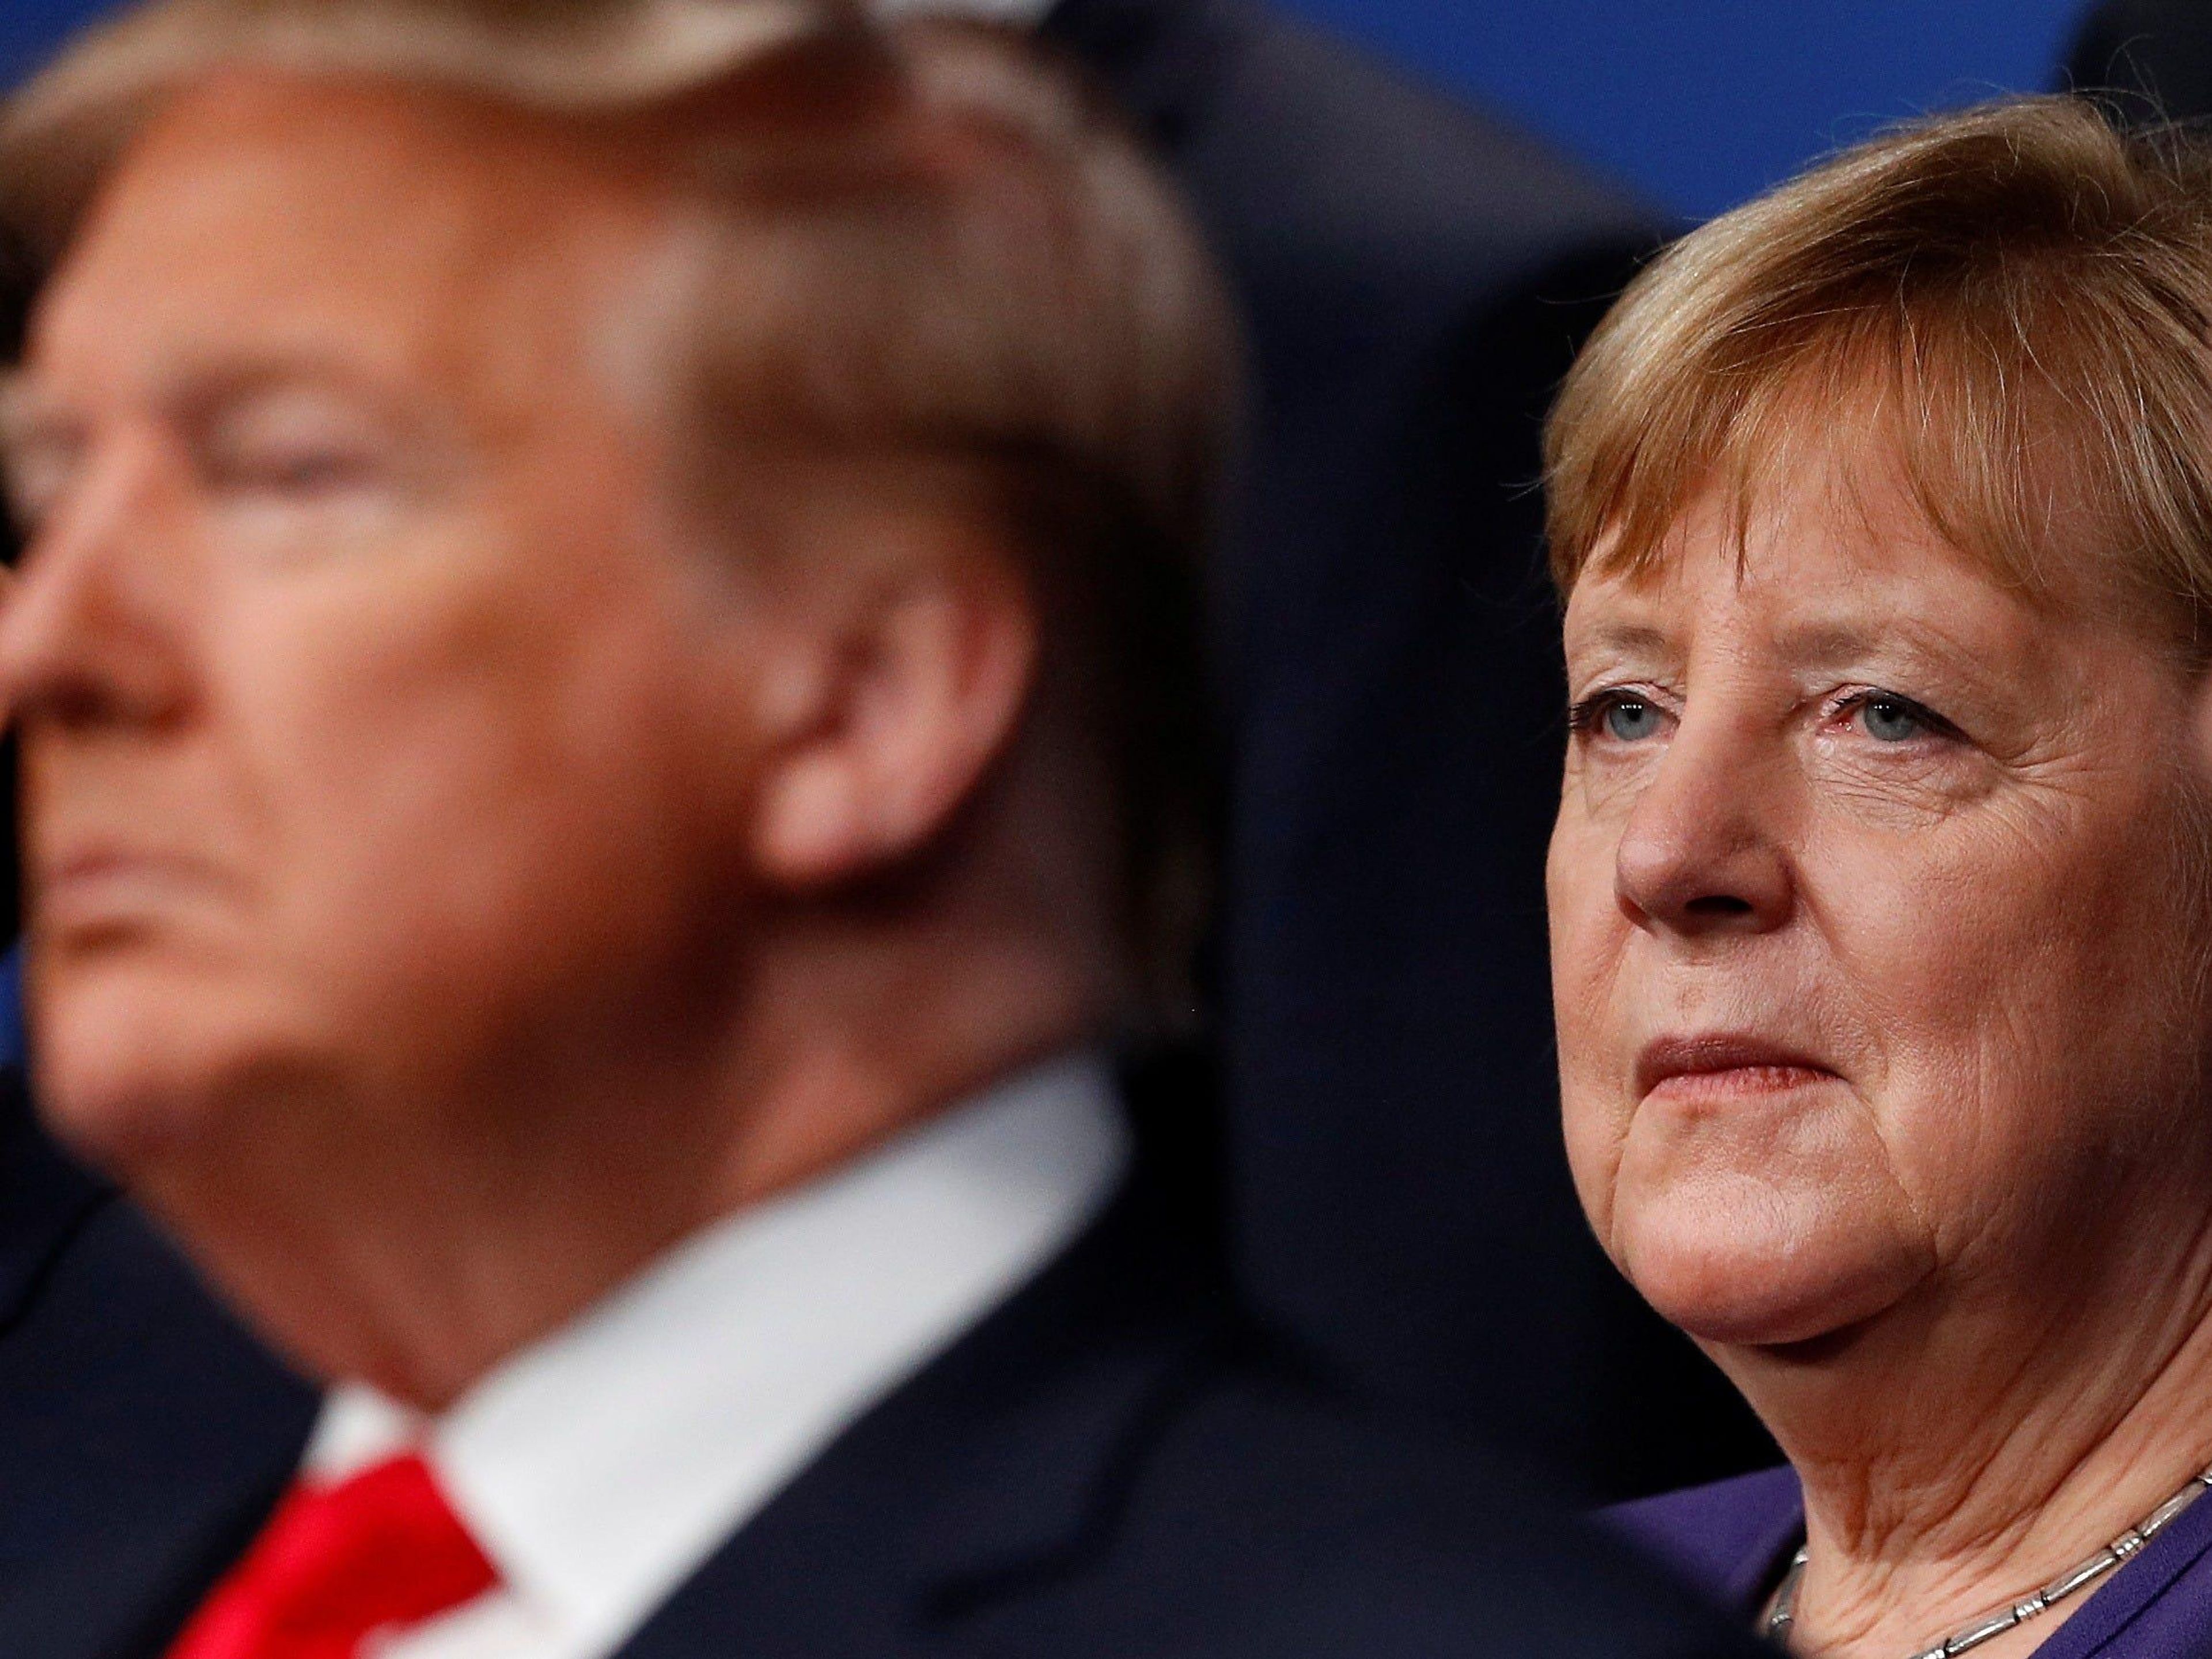 German officials were so alarmed by Trump's conversations with Angela Merkel that they took extra steps to make sure they stayed secret, according to a CNN report